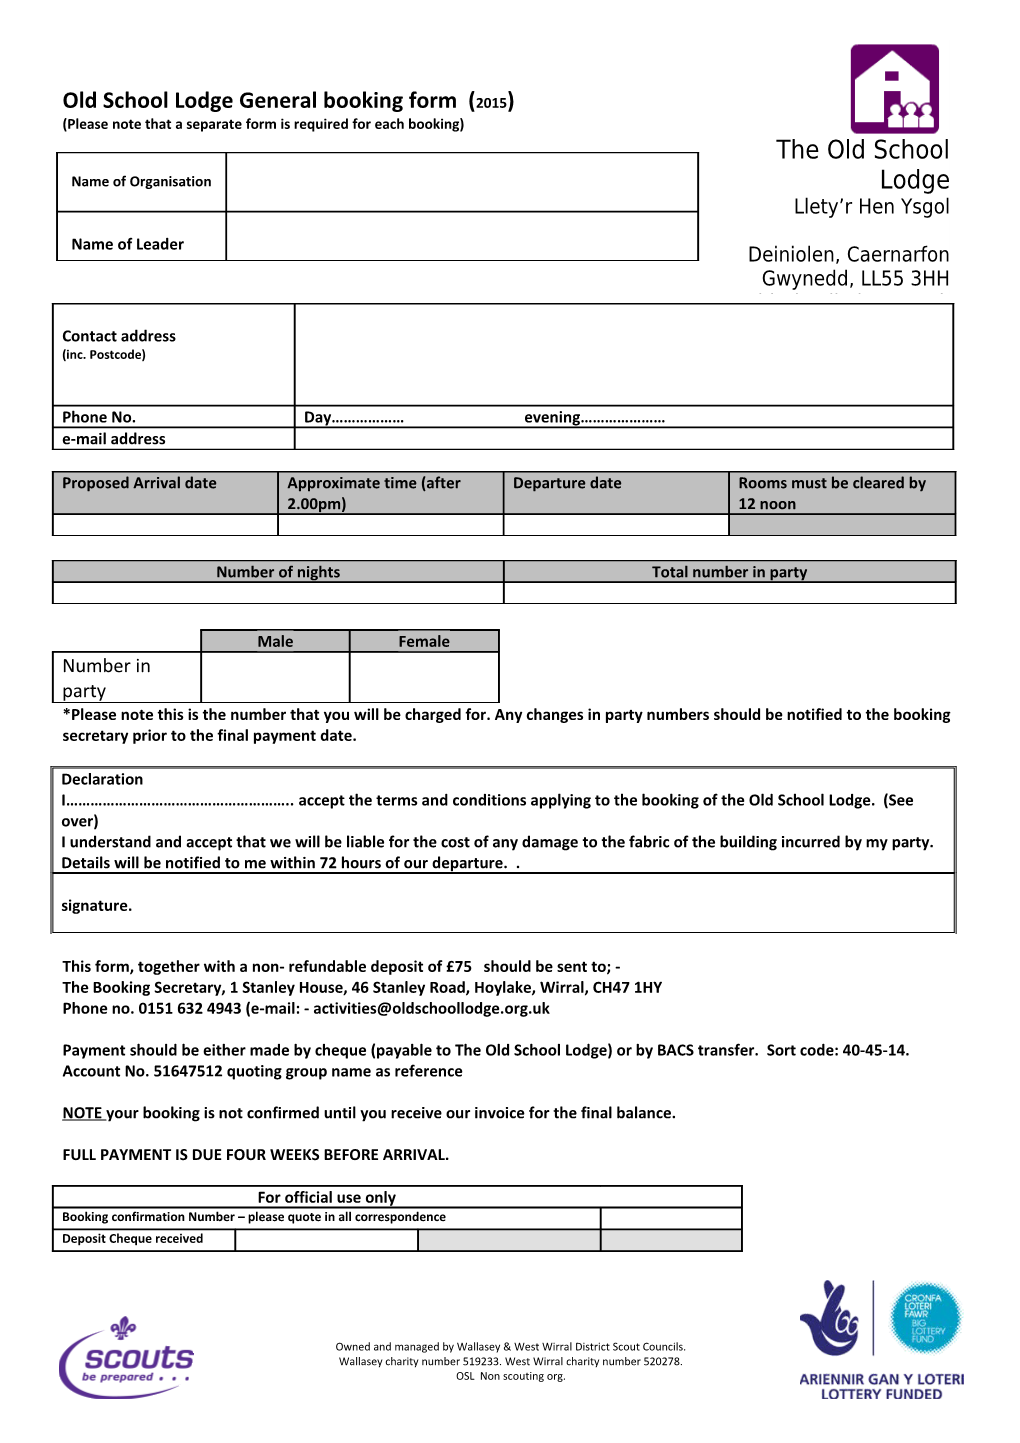 Old School Lodge General Booking Form (2015)